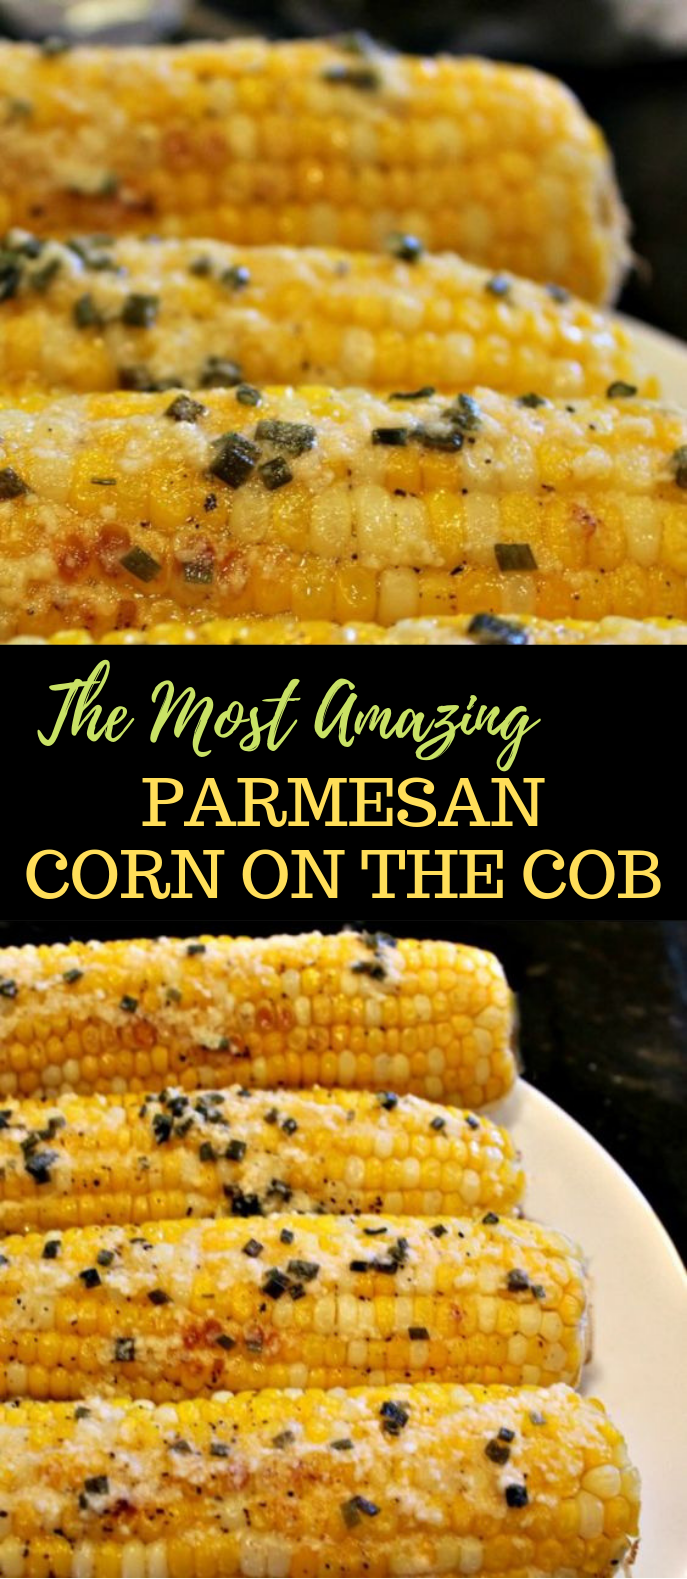 The Most Amazing Parmesan Chive Corn on the Cob #BBQ #Party